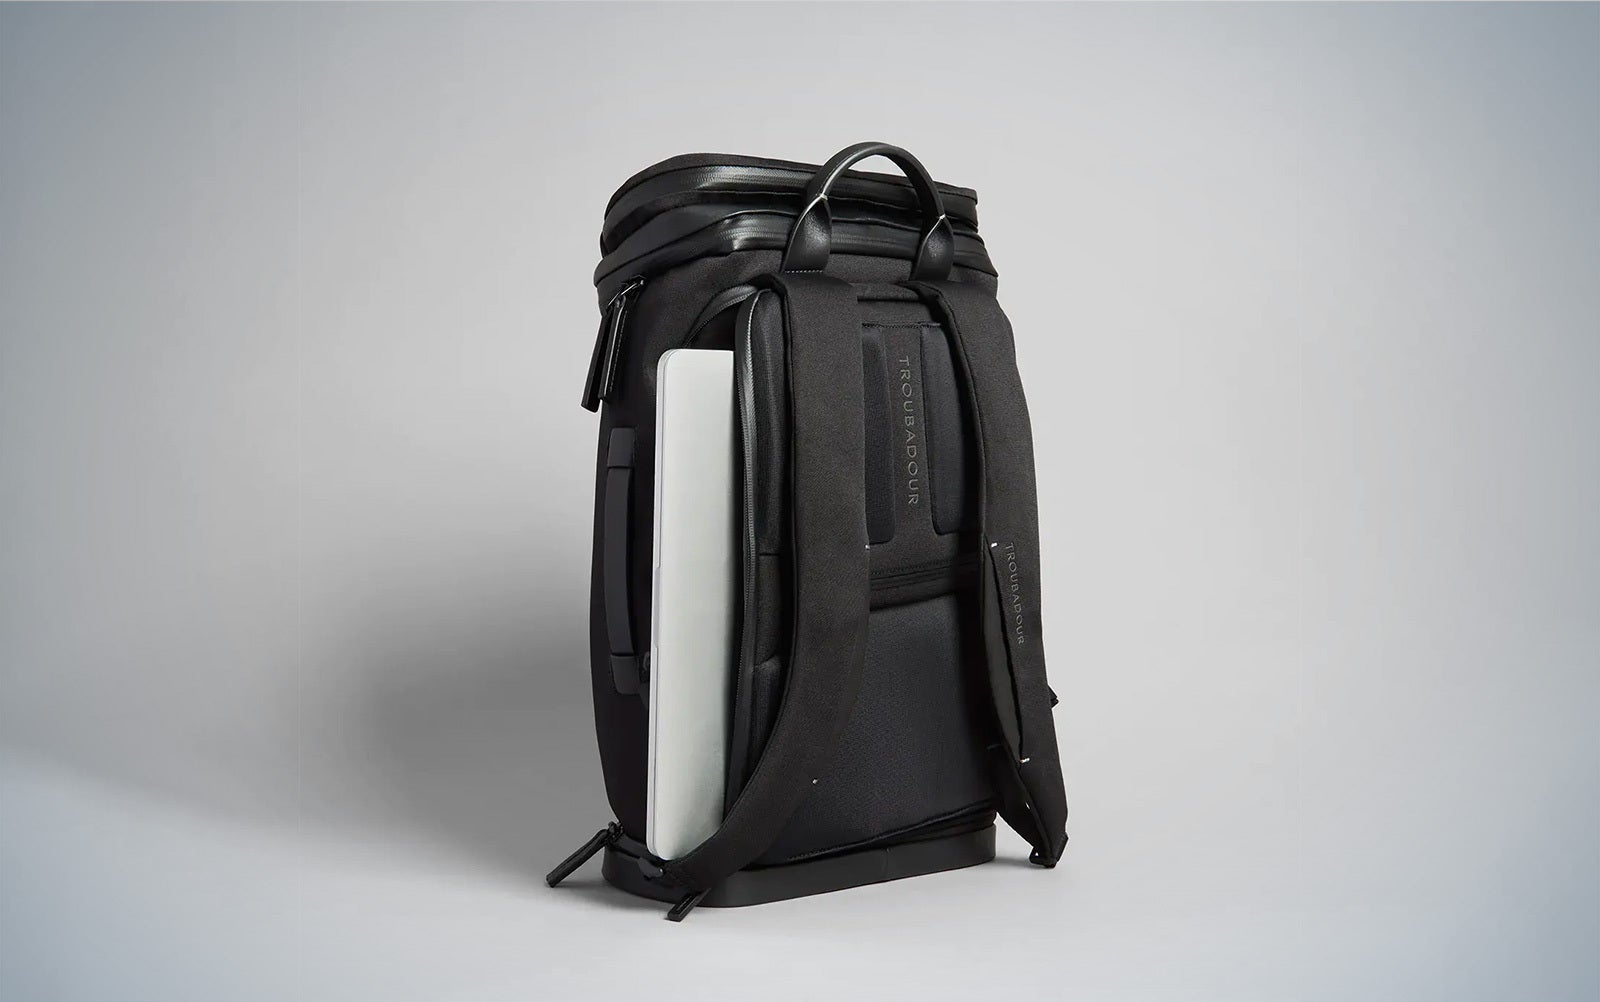 Black Troubadour Aero backpack with a silver laptop peeking out of the rear pocket